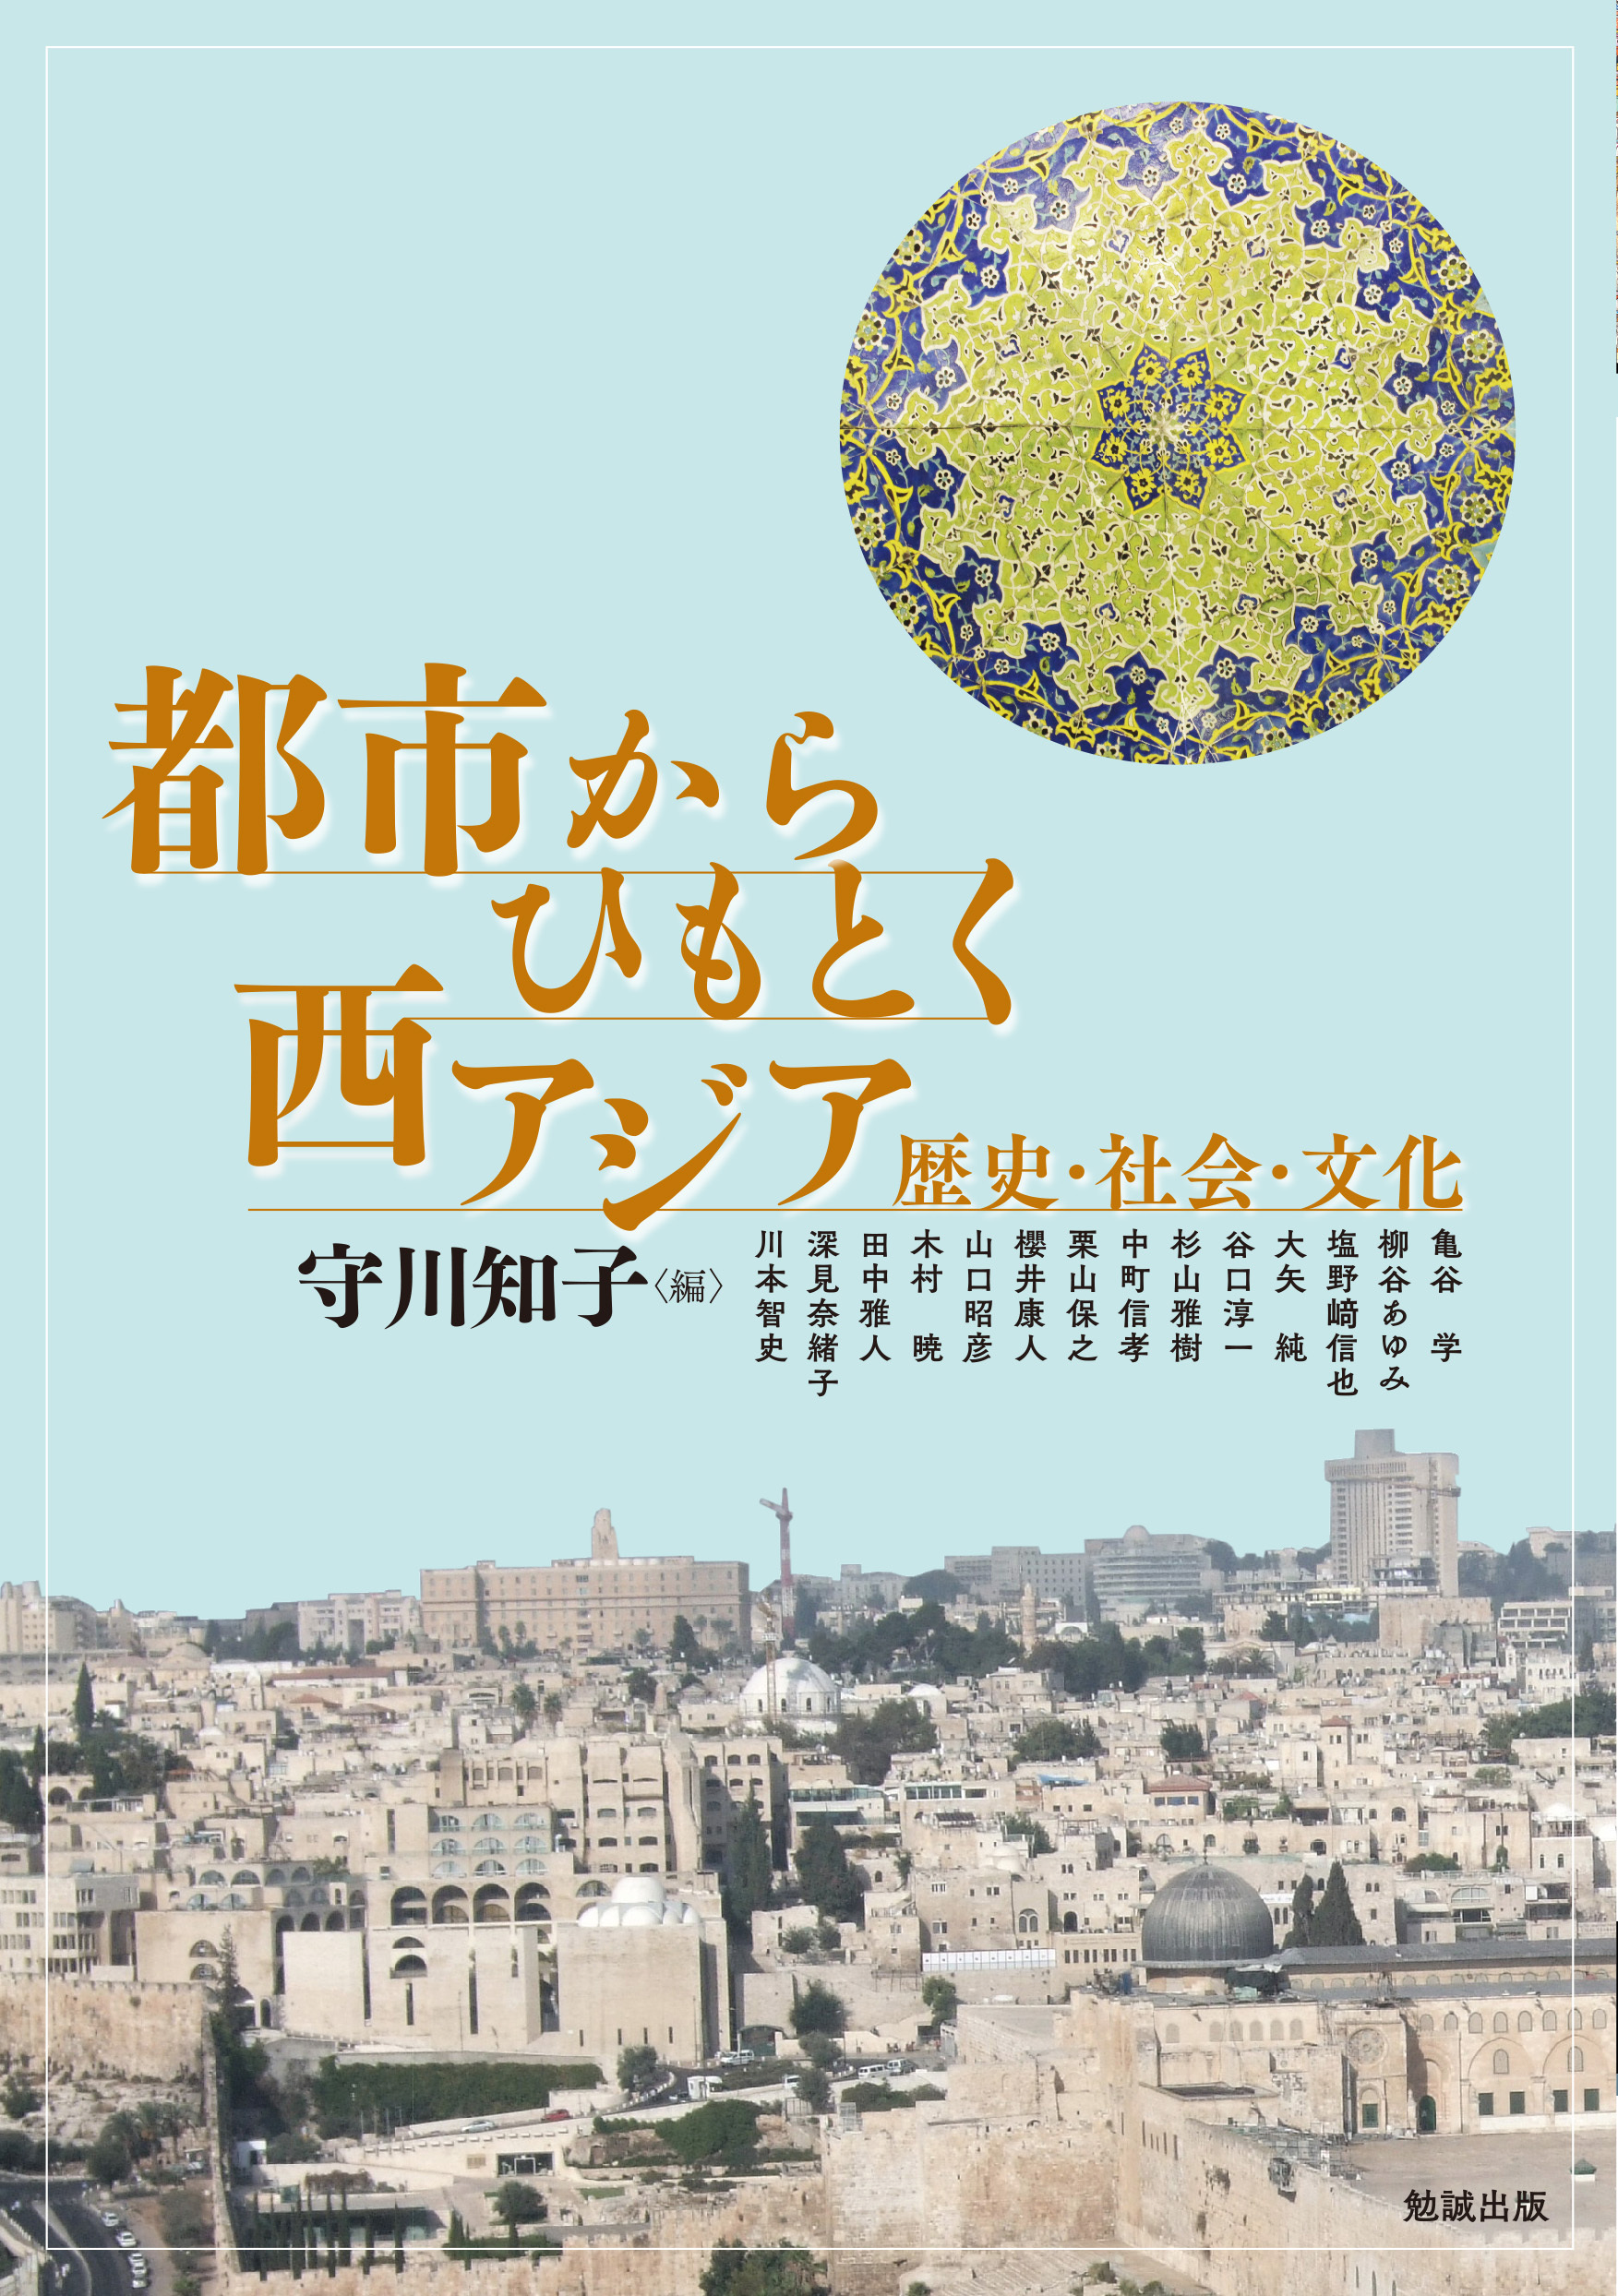 A blue cover with a picture of bird's eye view of the city of Israel